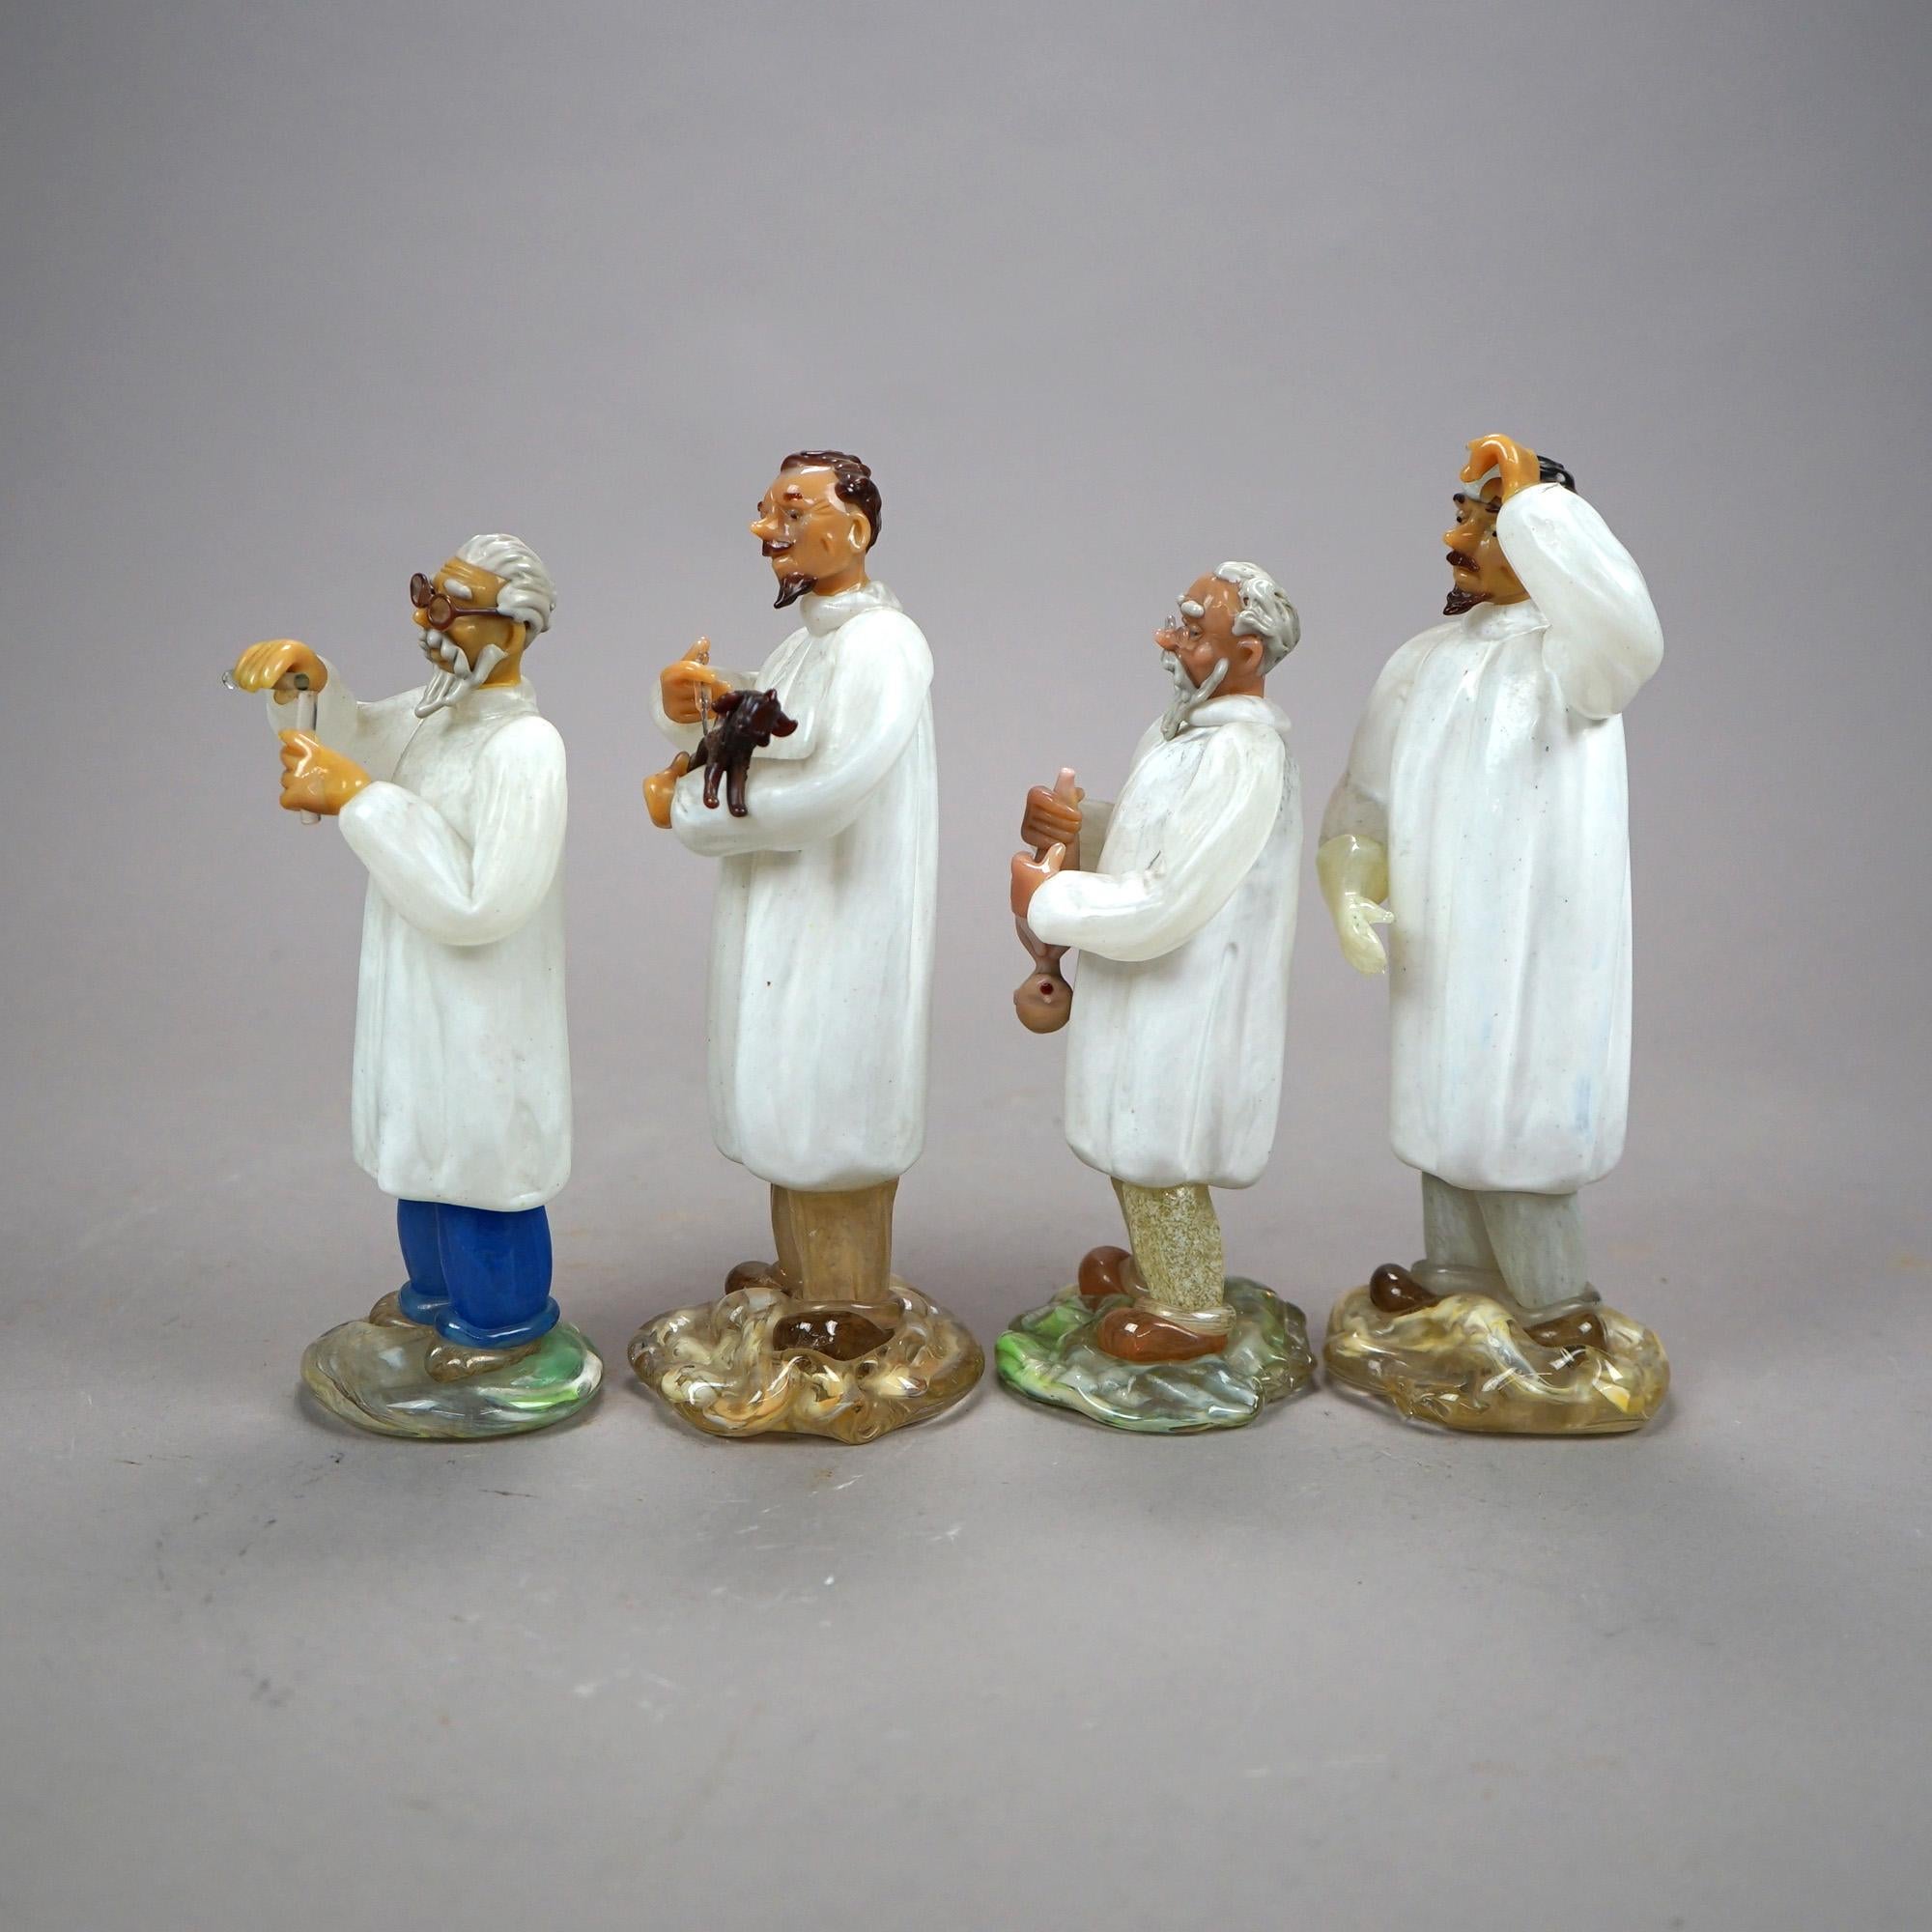 20th Century Four Arcadia Czech Murano Art Glass Figurines of Medical Professionals, 20th C